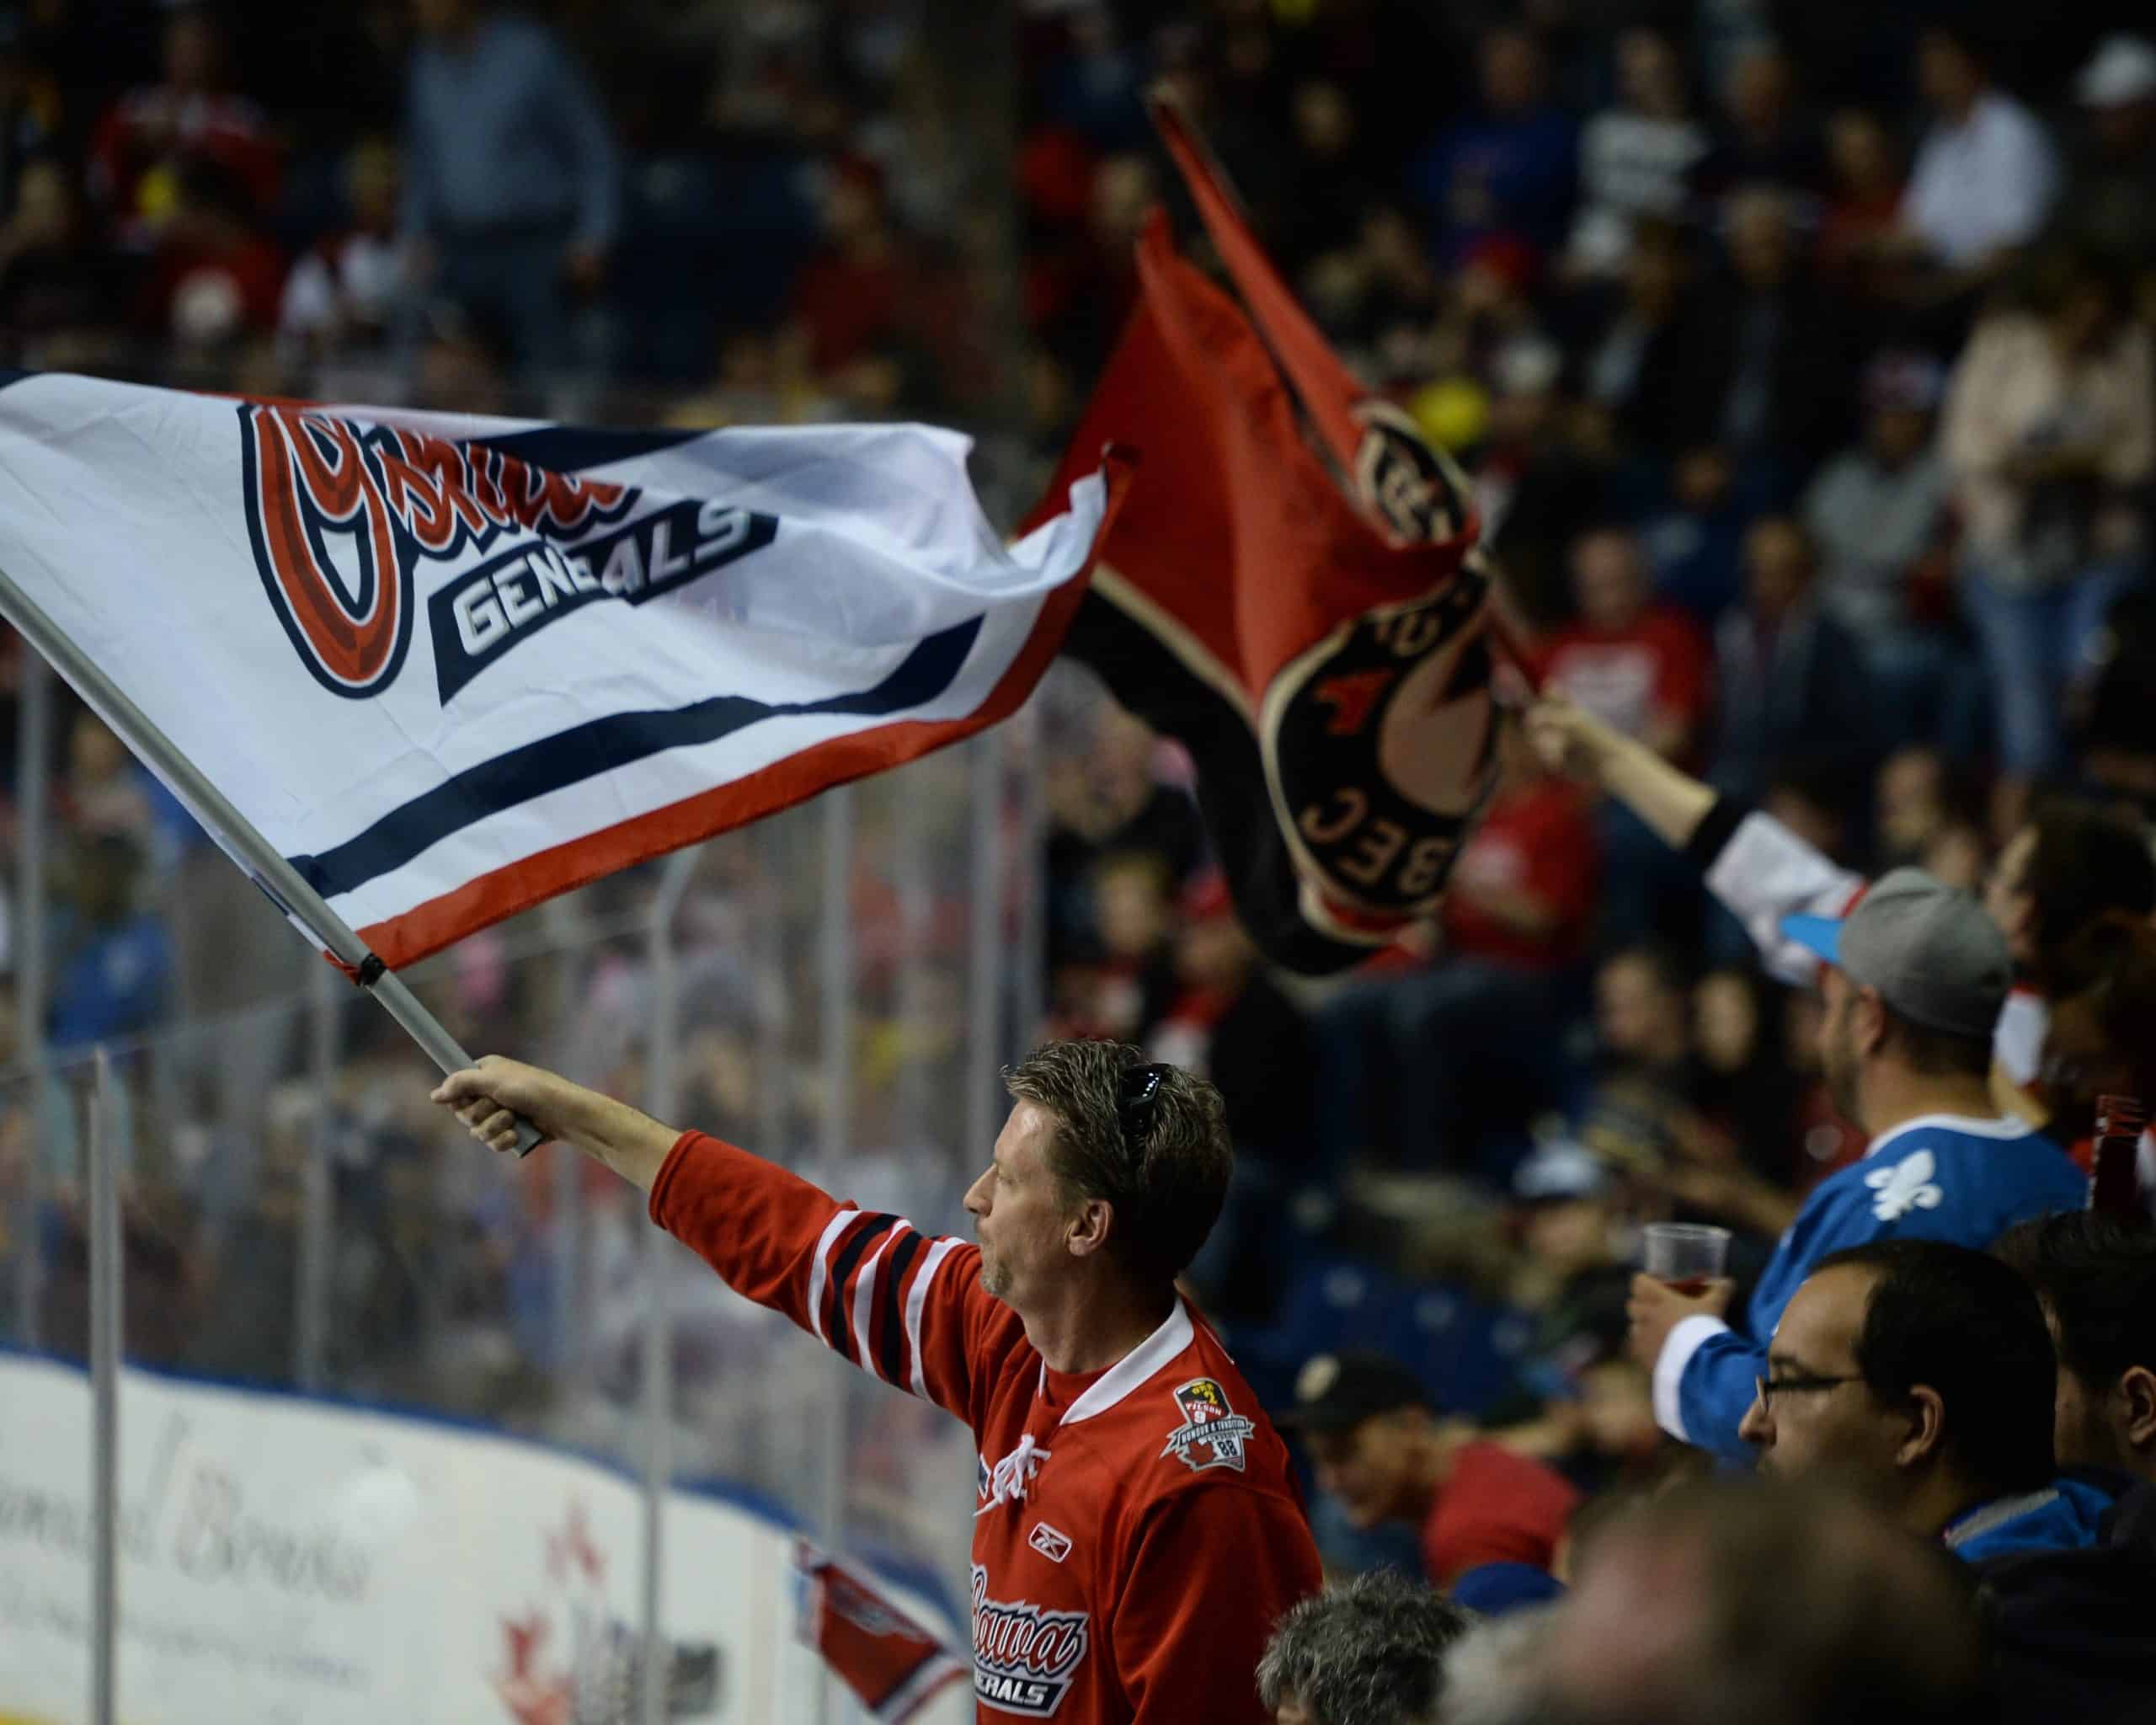 At the Oshawa General's home opener, 2015, We were on hand …